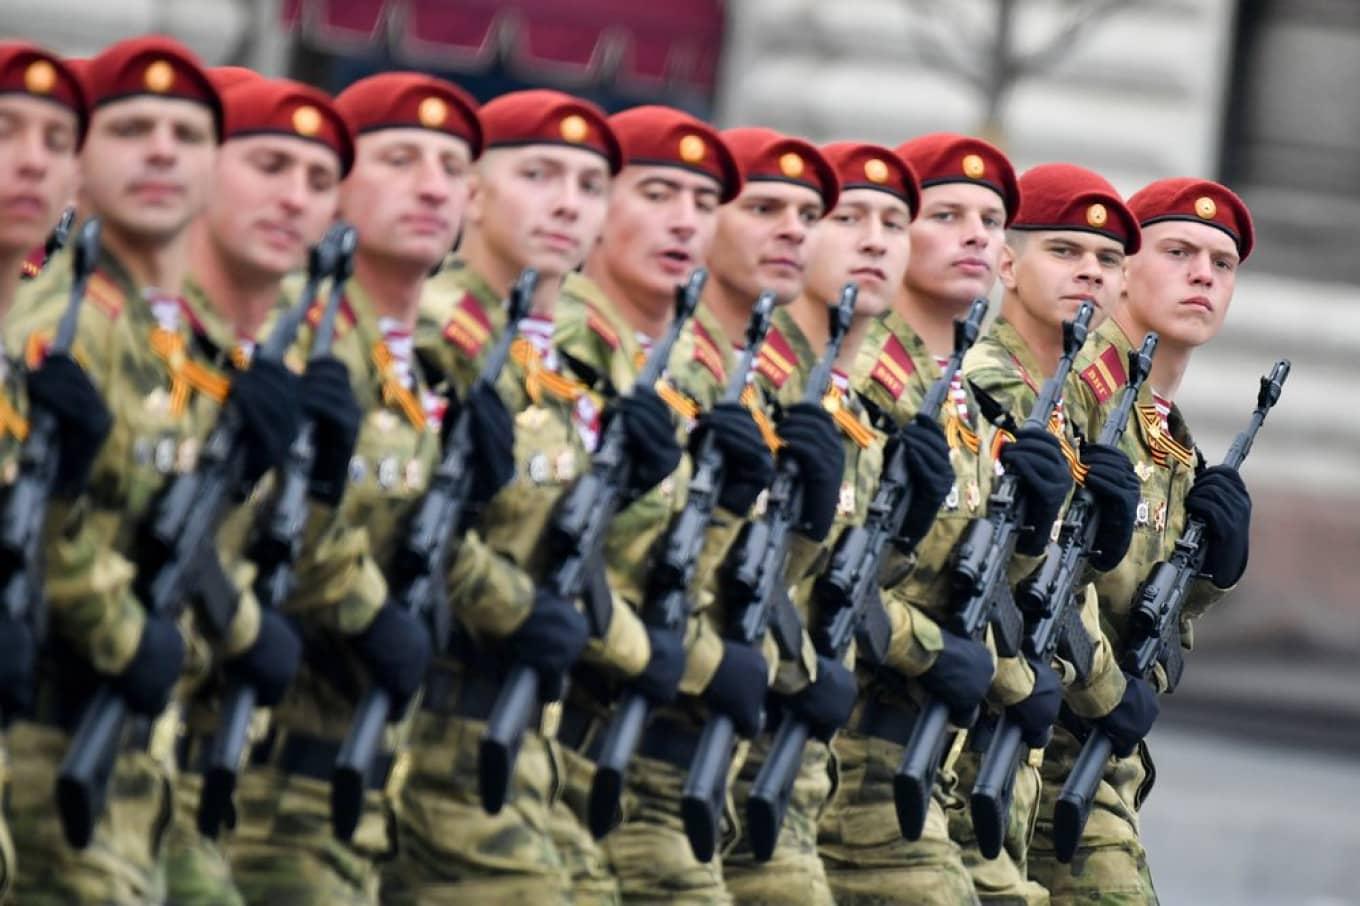 Russia begins Mobilization of its reserve force, is it immediate threat to Ukraine?